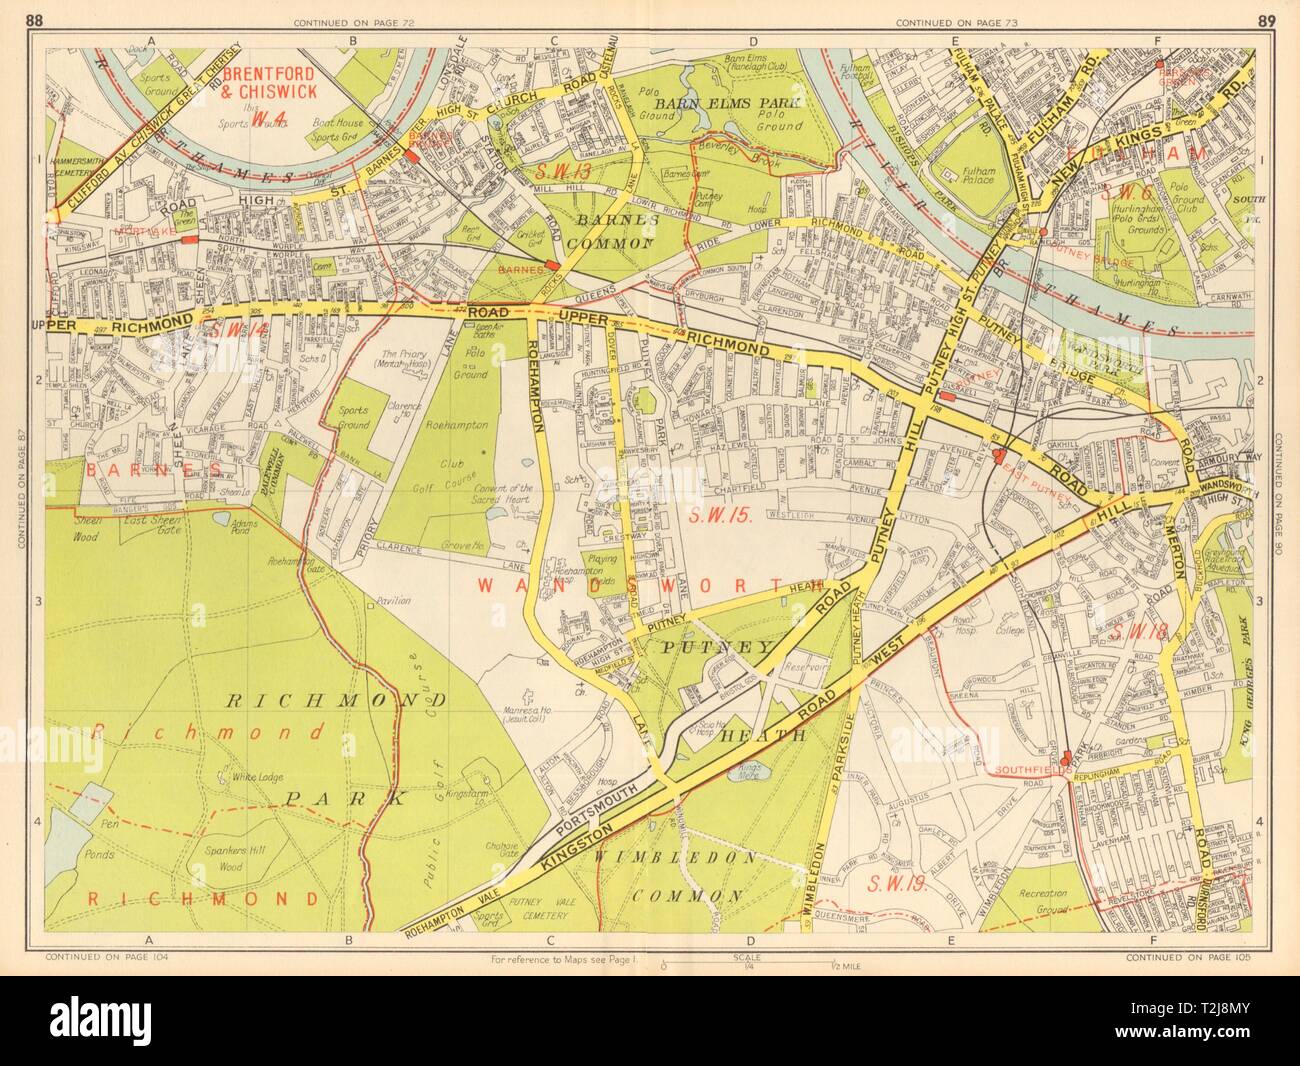 PUTNEY Wandsworth Barnes Mortlake Parsons Green. GEOGRAPHERS' A-Z 1948 old map Stock Photo